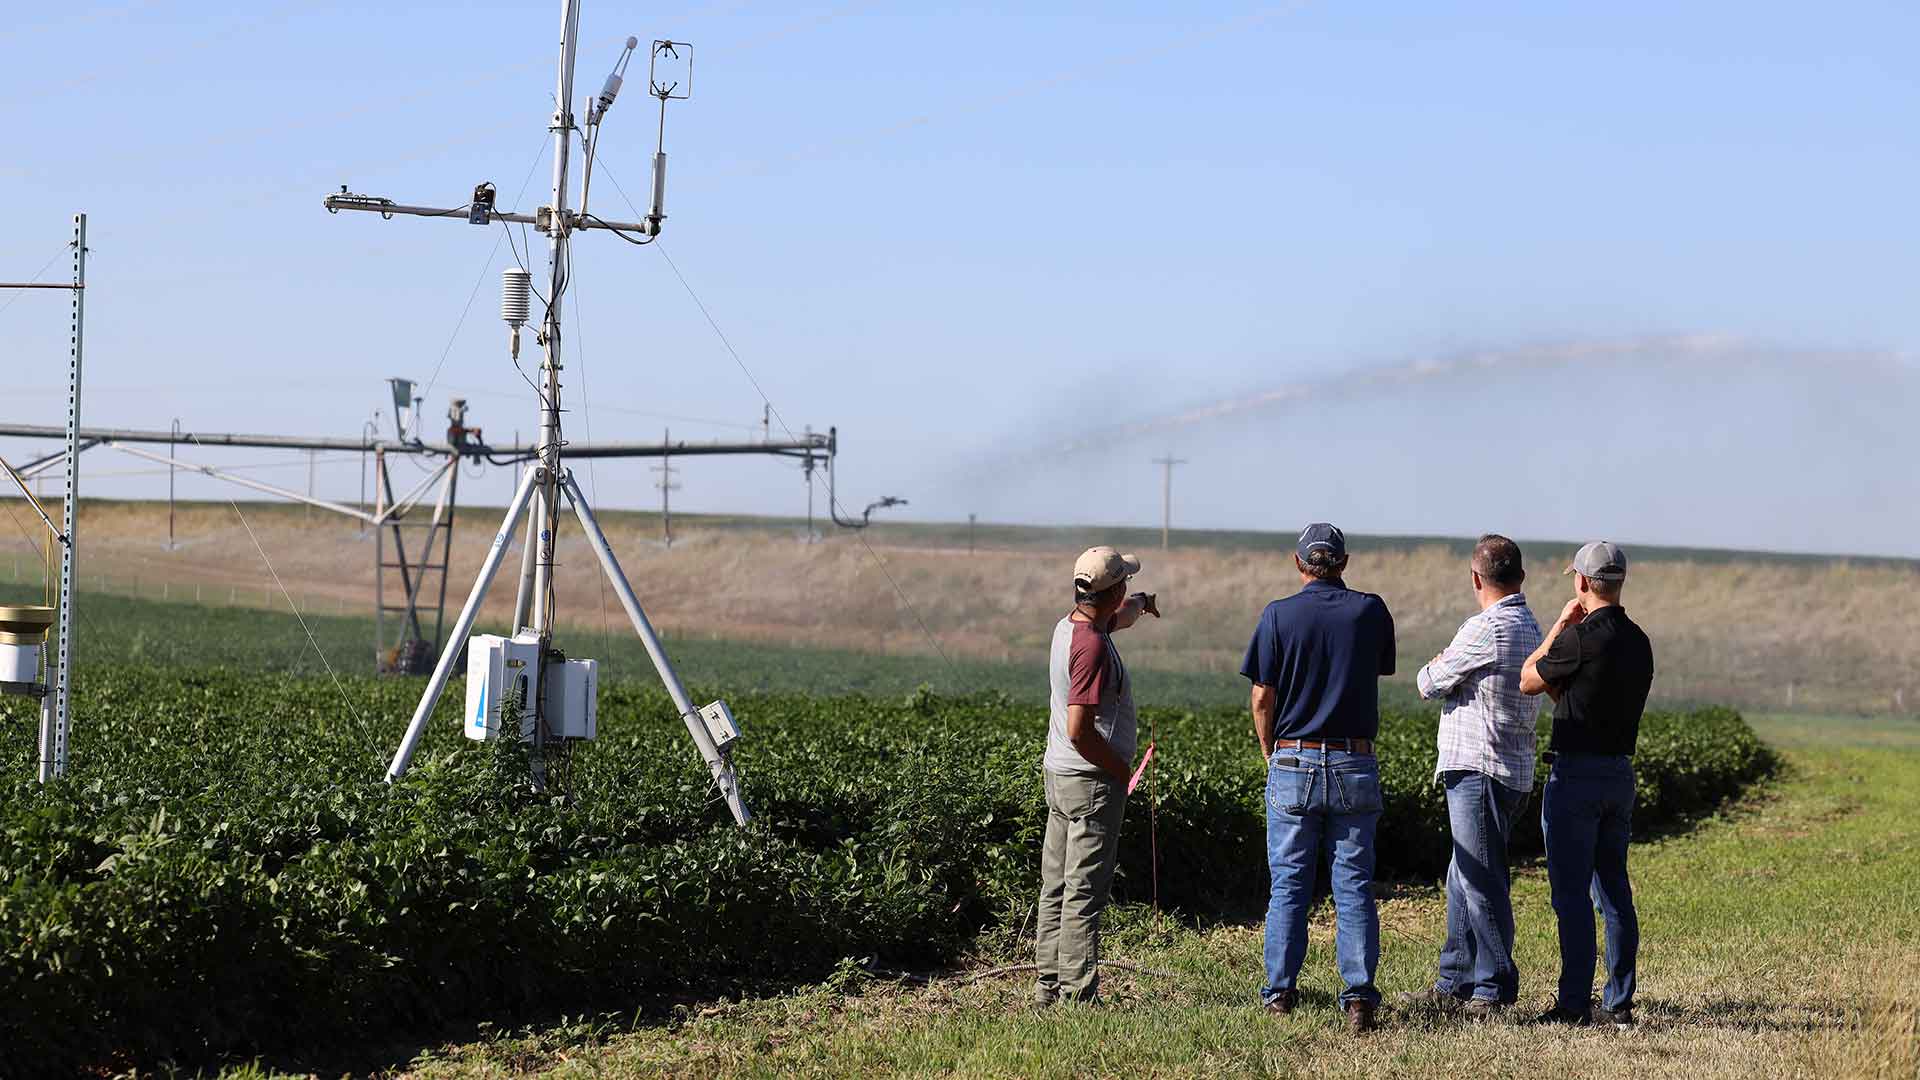 Small group beside equipment sitting in agriculture field